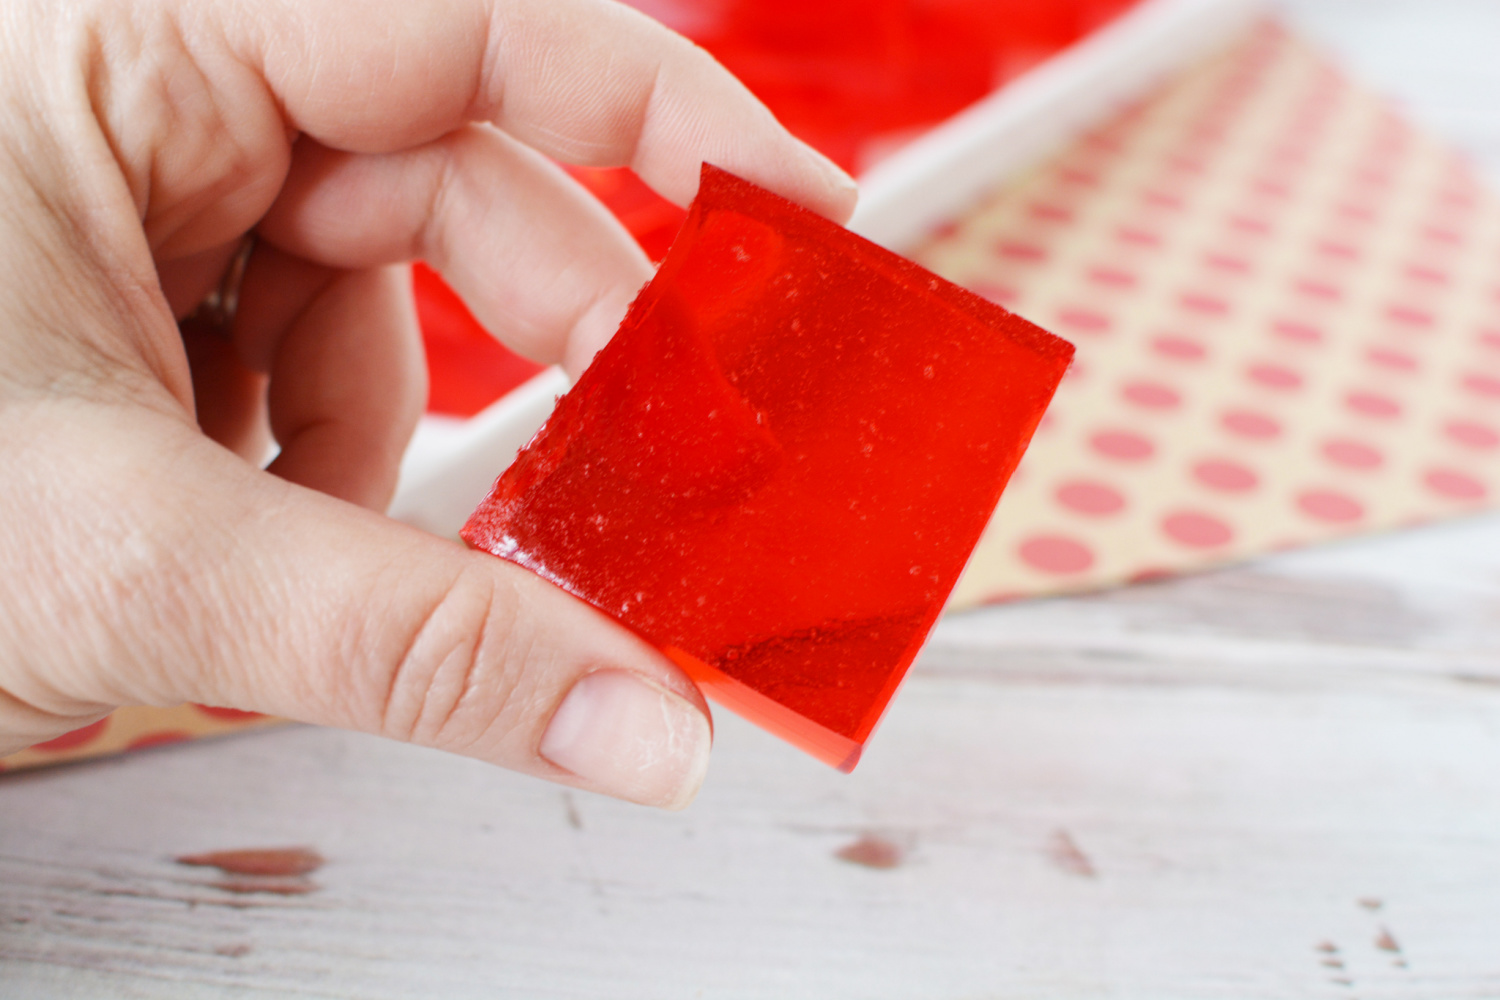 Easy Finger Jello being picked up by hand